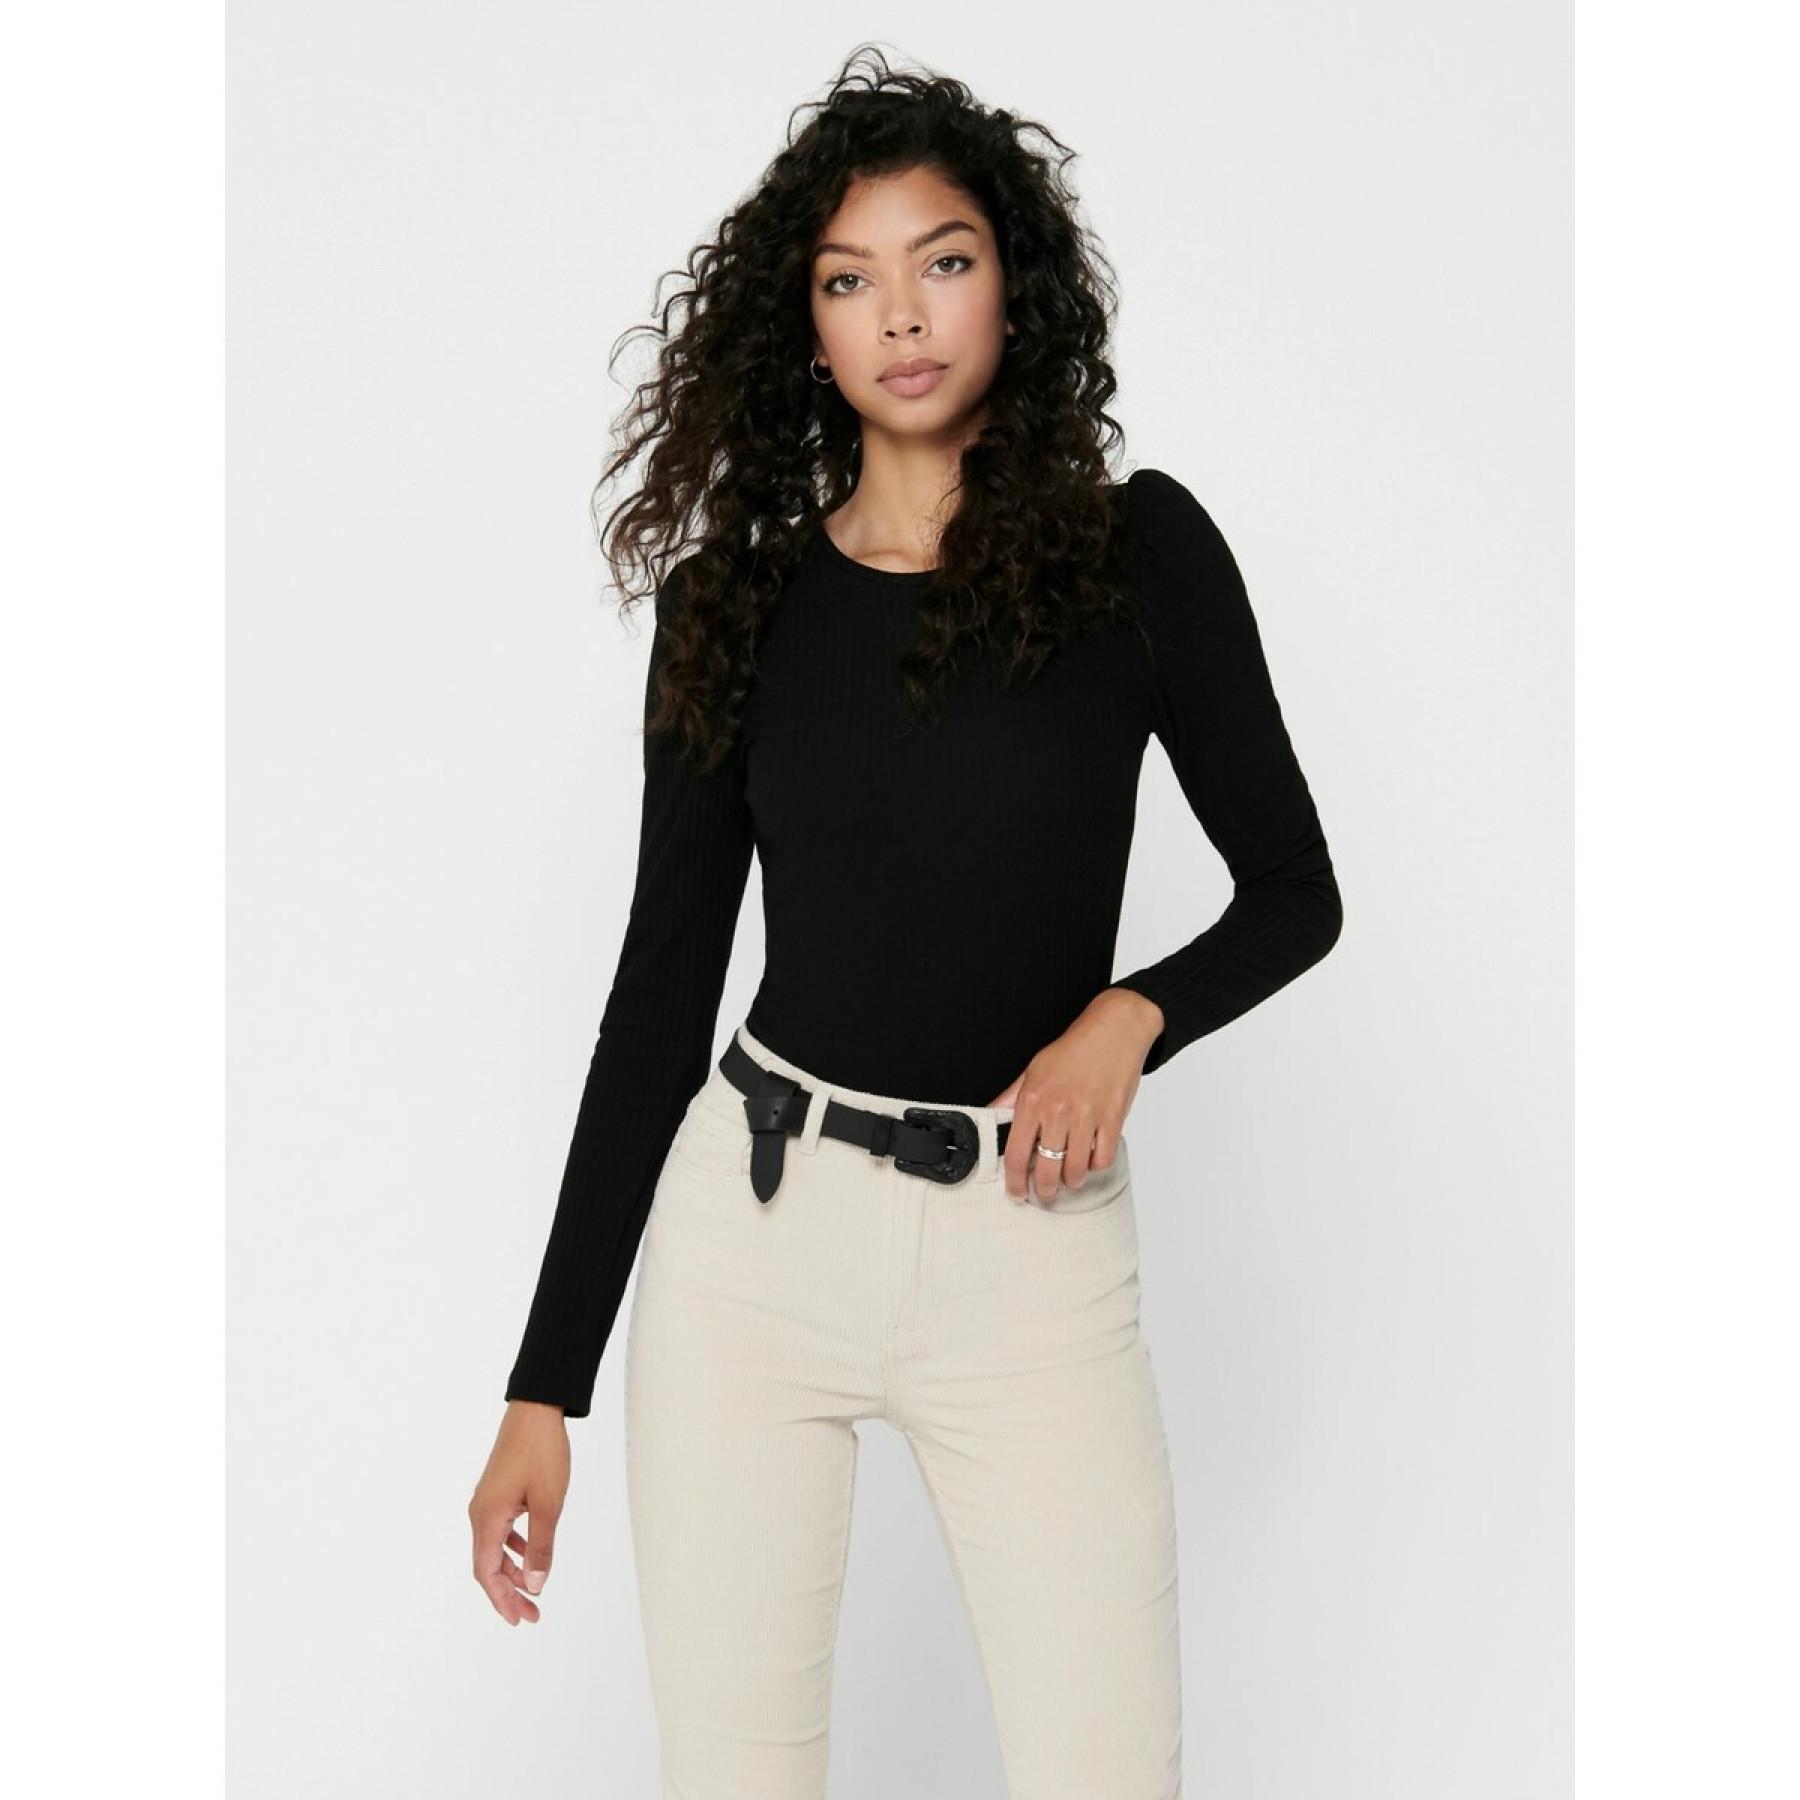 Vrouwen top Only Emma manches longues